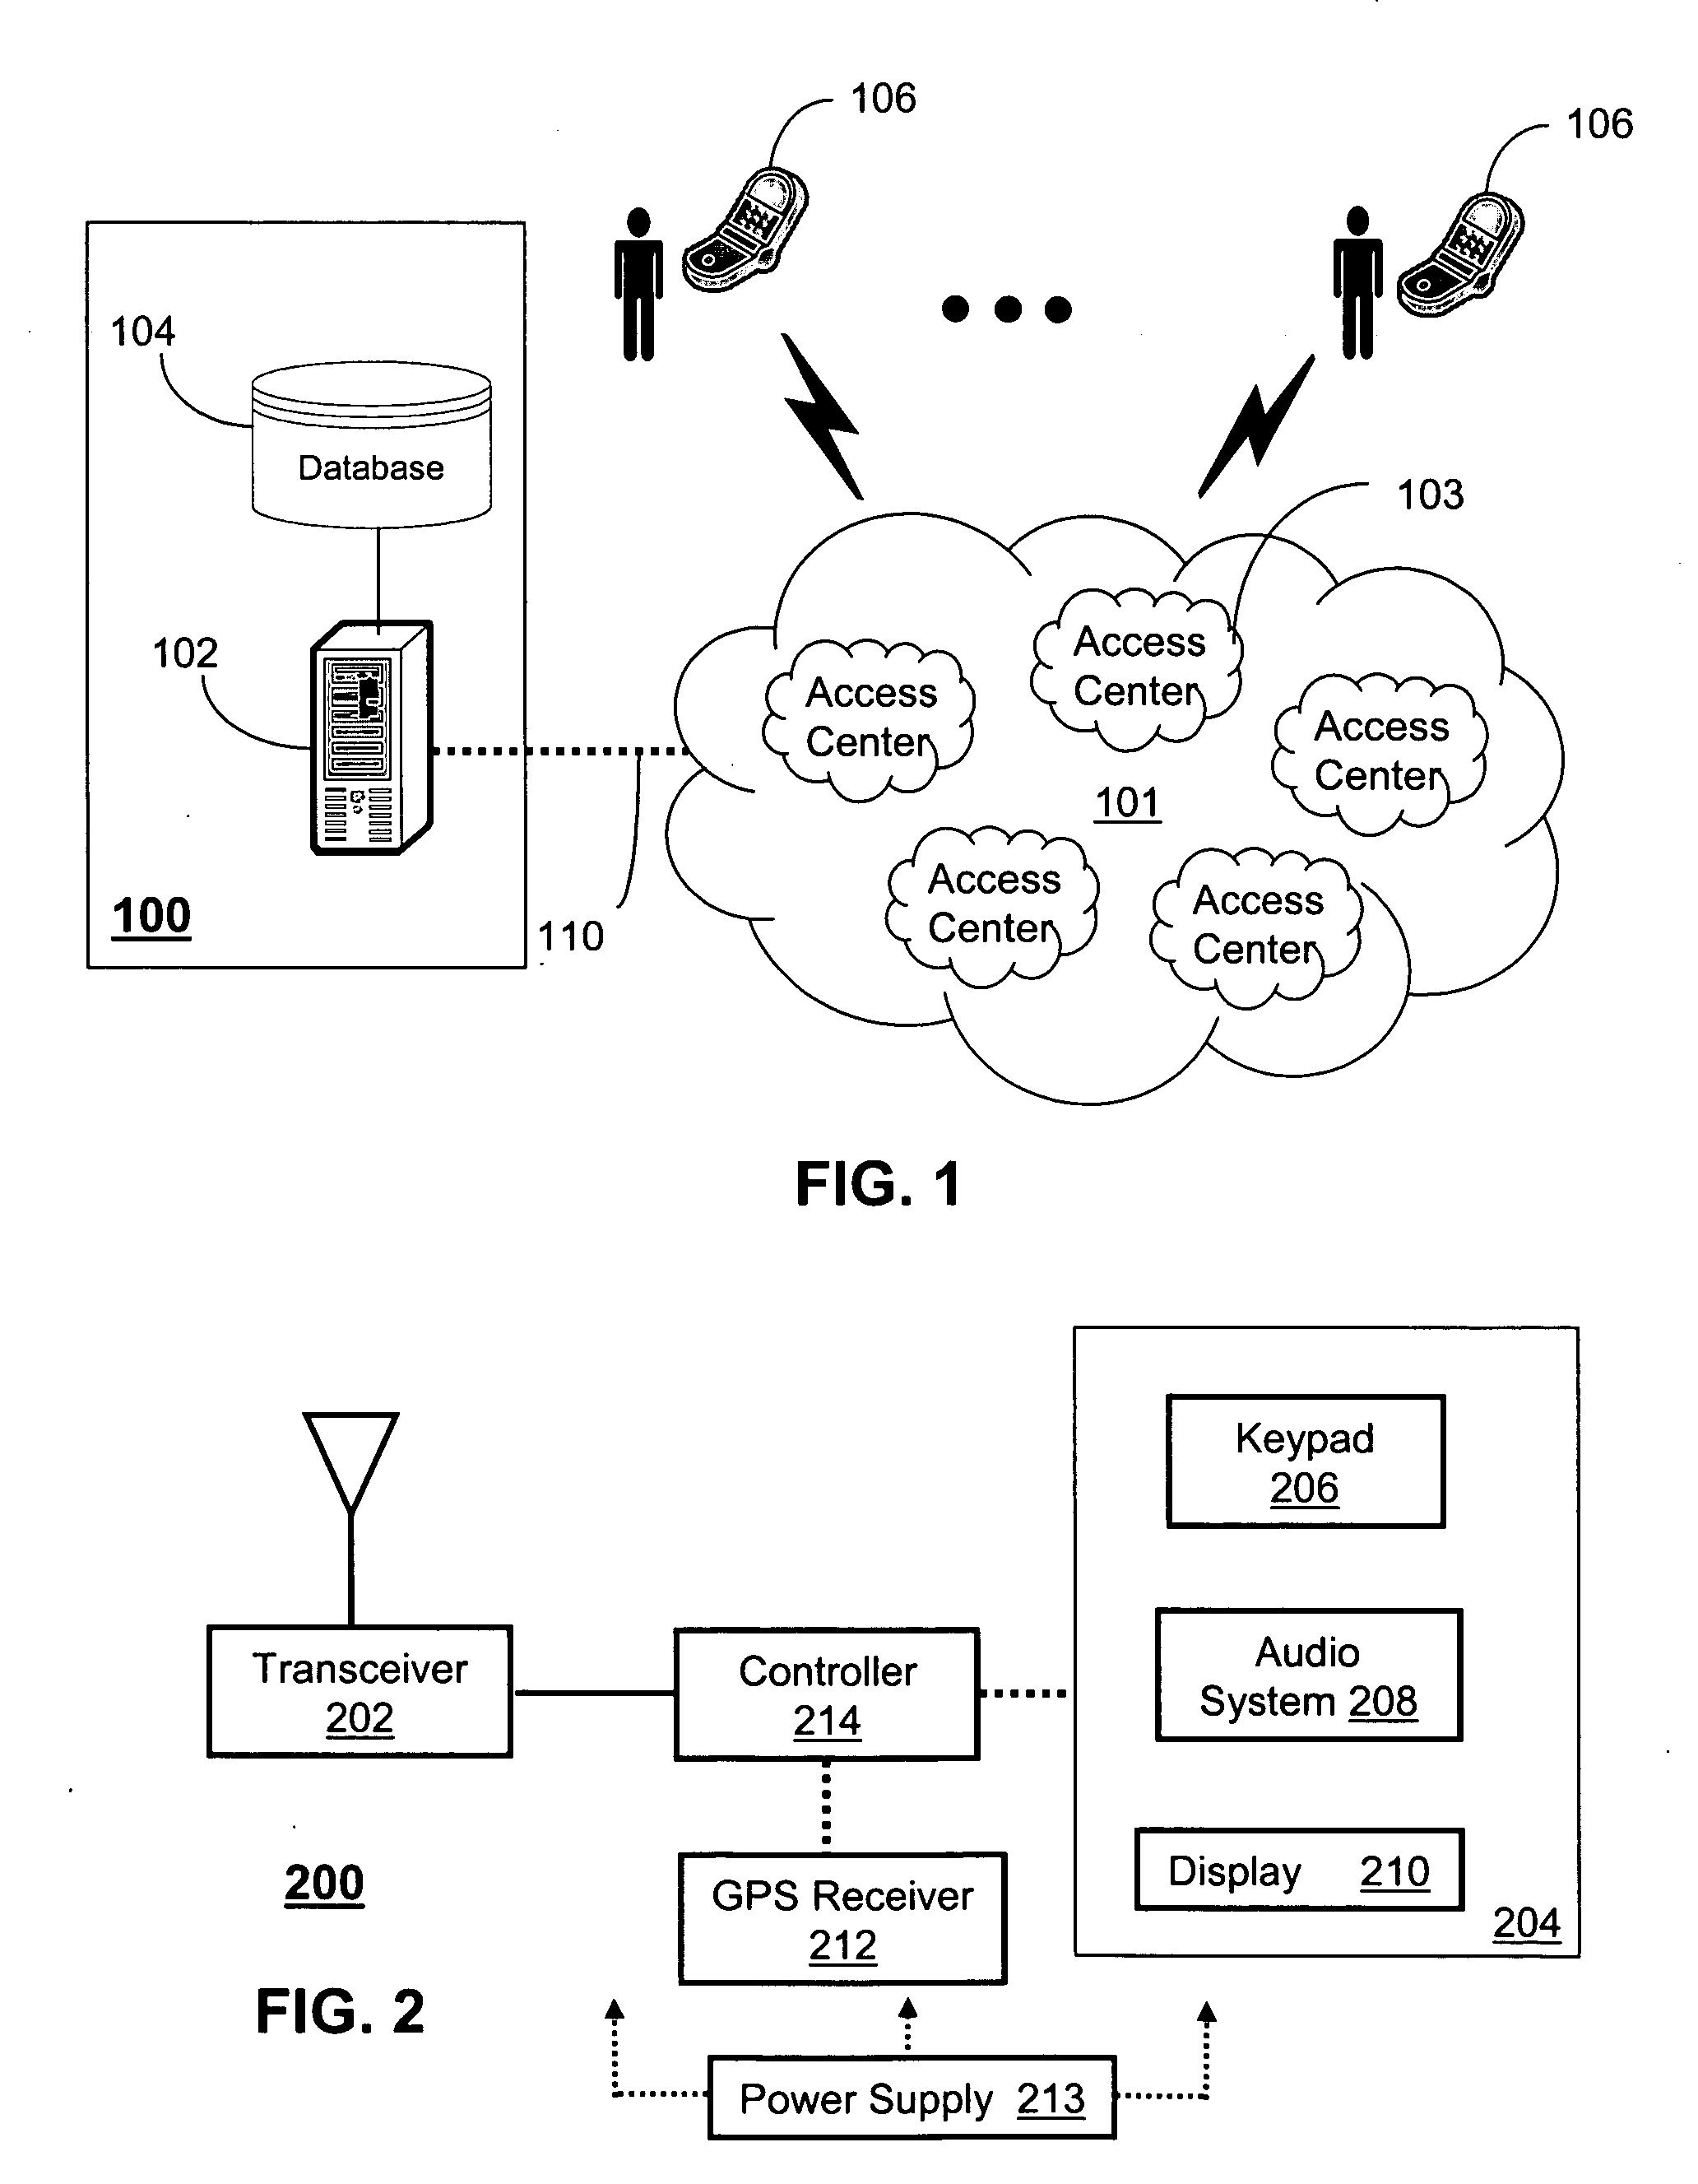 Method for enabling communications between a communication device and a wireless access point